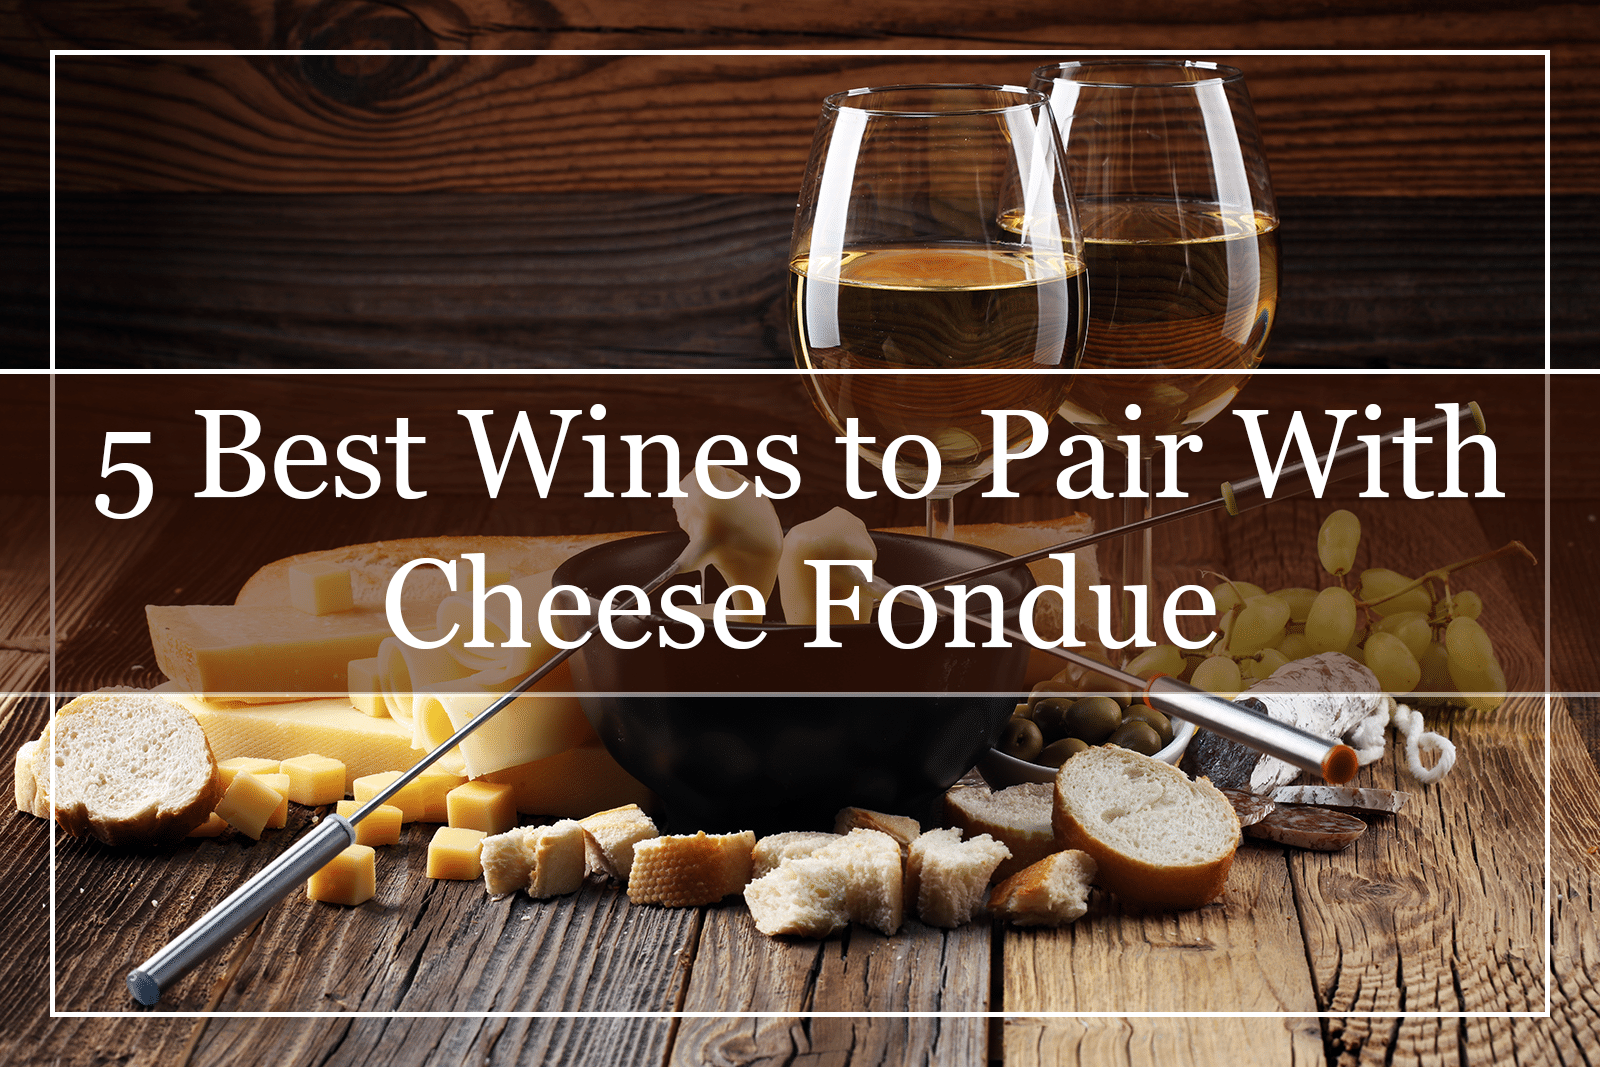 5 Best Wines to Pair With Cheese Fondue (2021)